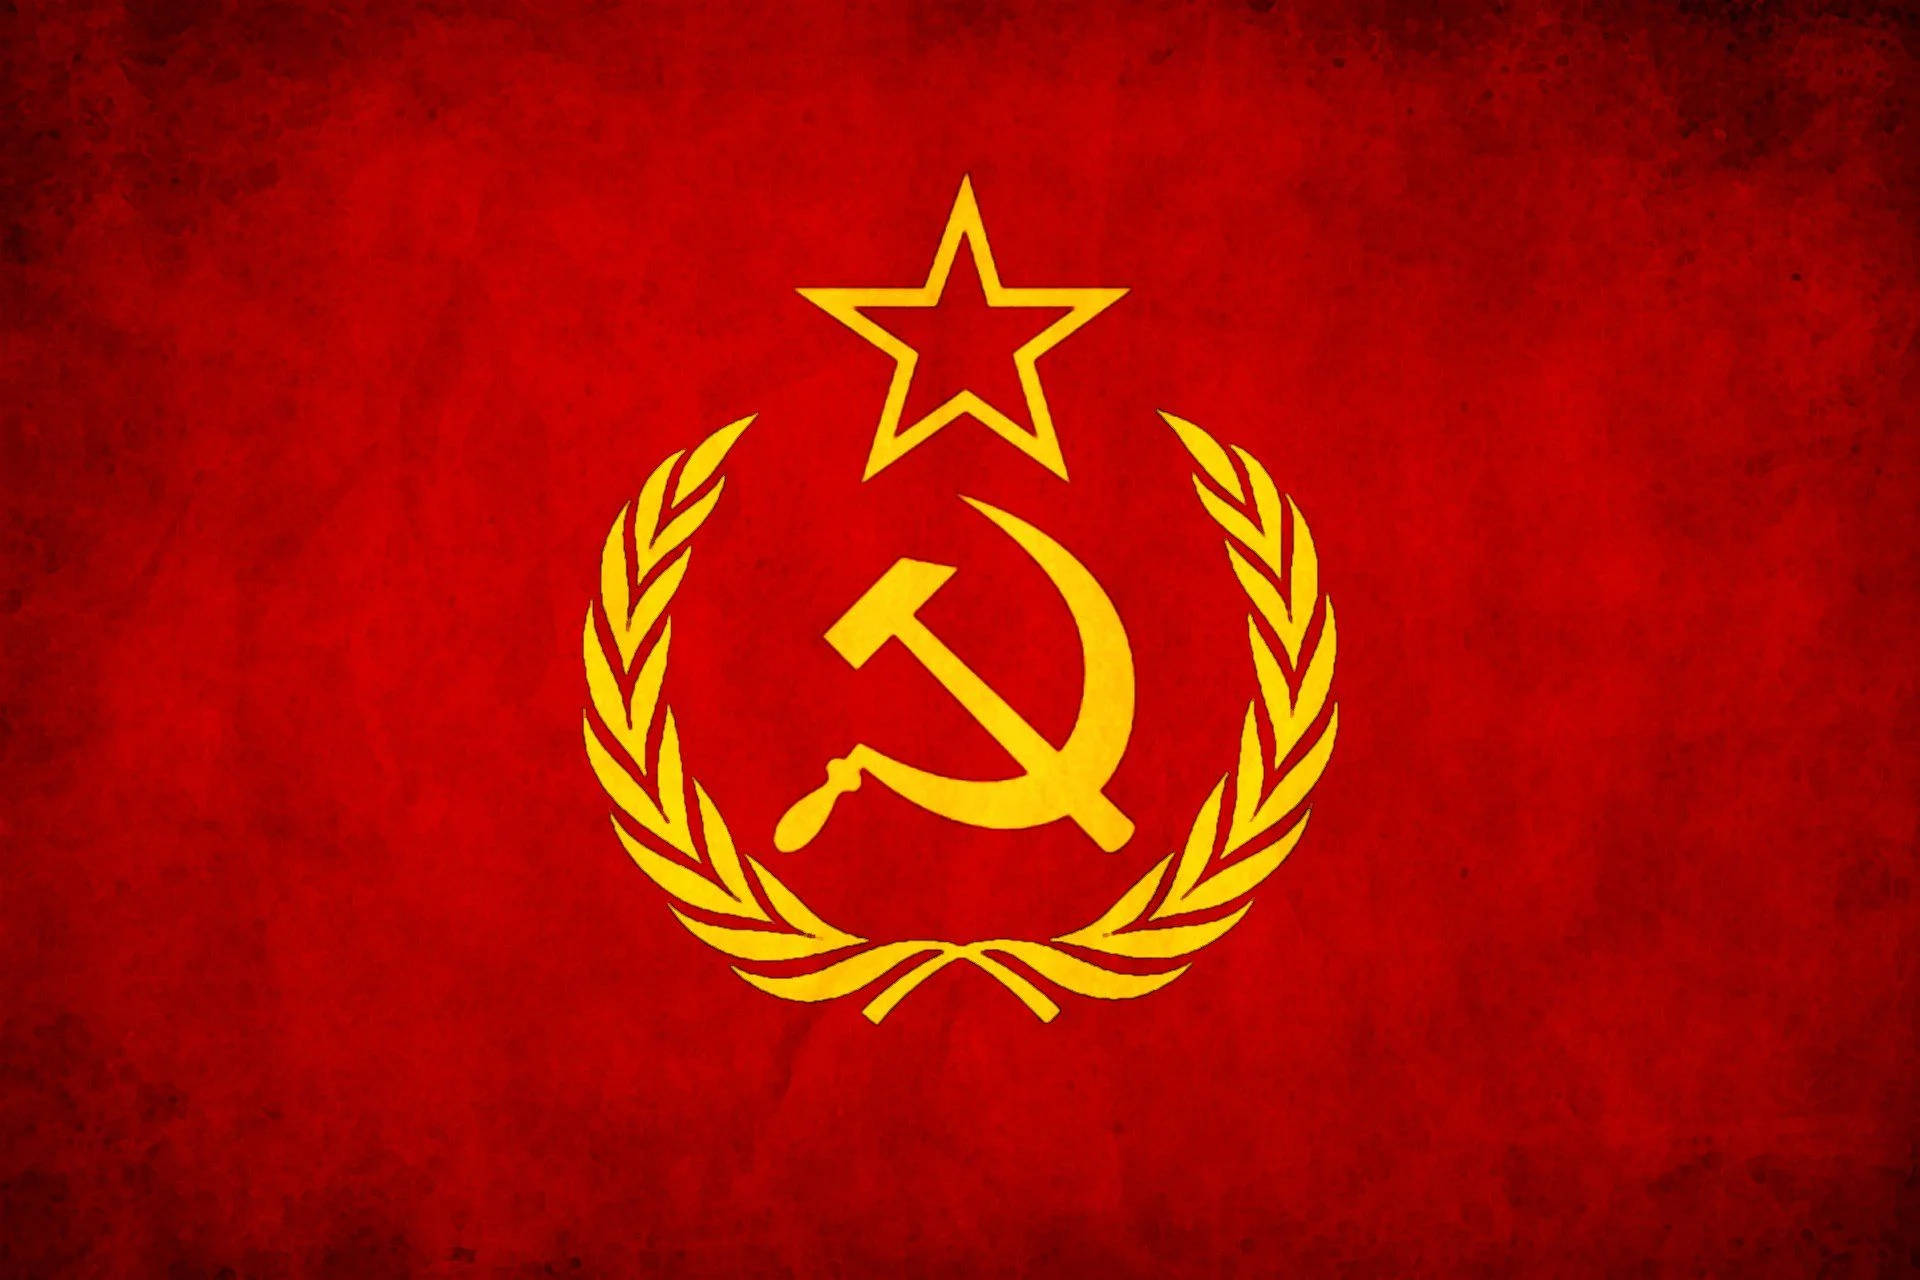 Amazon.com: The Great Communist Leader Lenin Poster Wallpaper Wall  Paintings Soviet Union CCCP USSR Propaganda Banner Flag Tapestry Mural  96x144 cm (38X57 inches): Posters & Prints